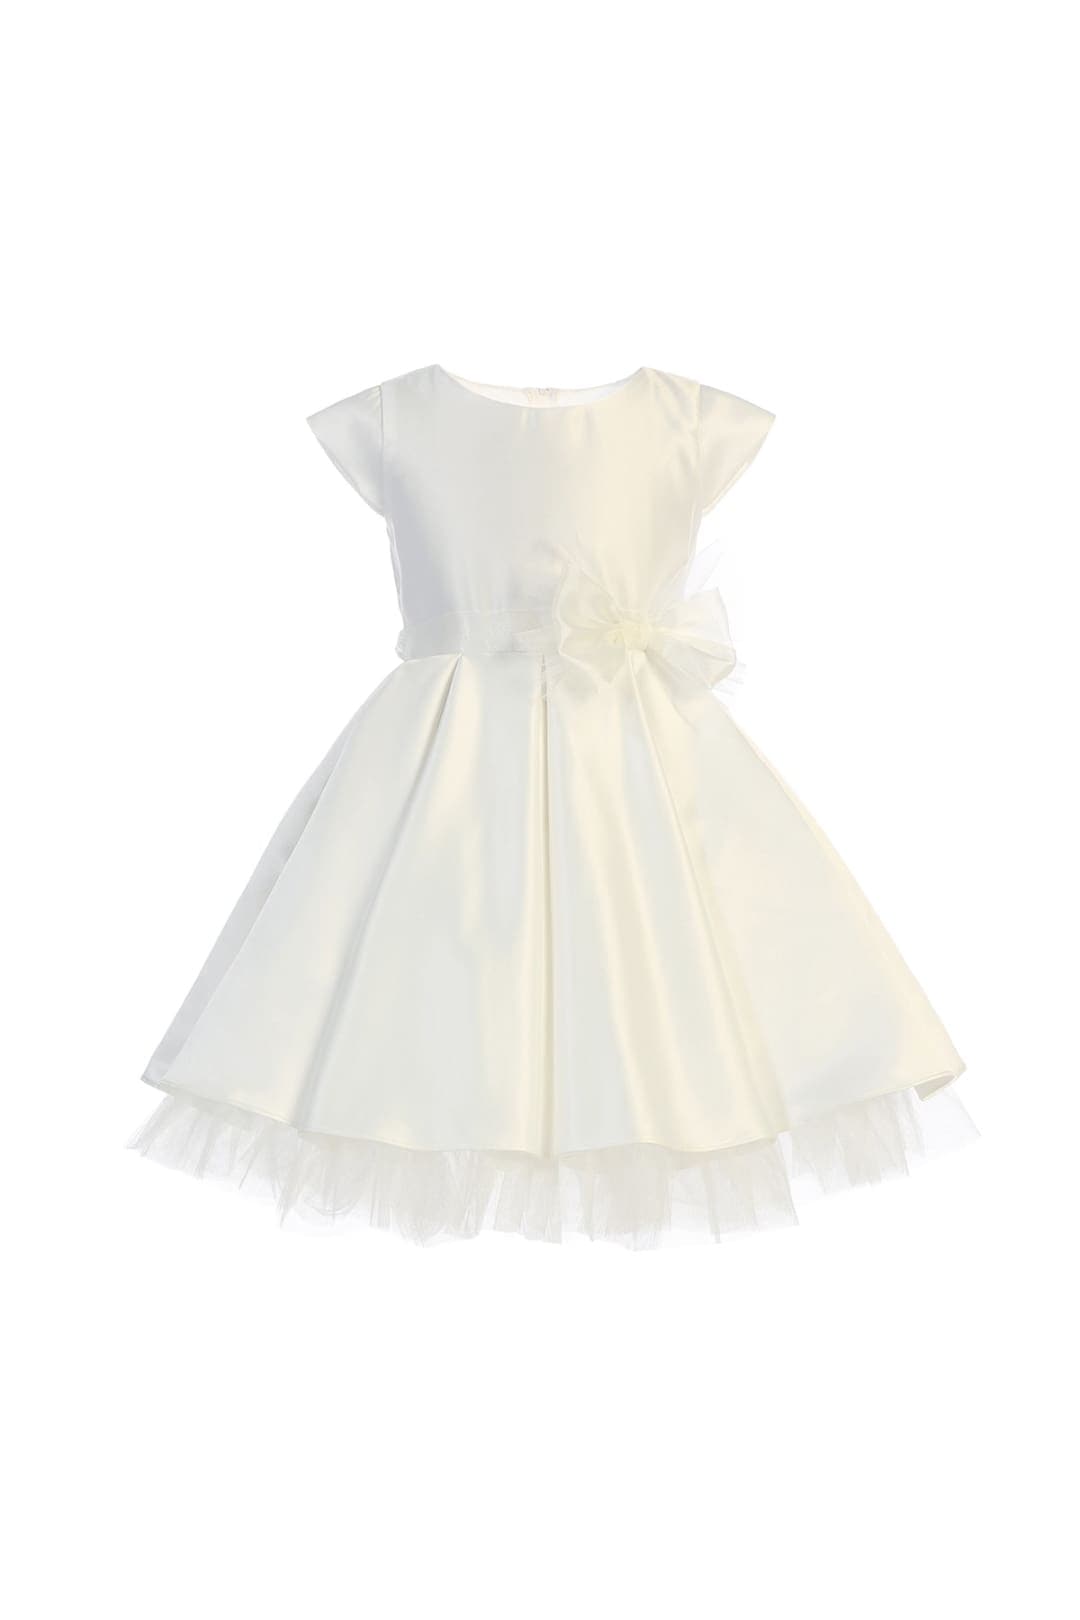 Little Girl Dress with Oversized Bow - LAK711 - OFF WHITE / 2